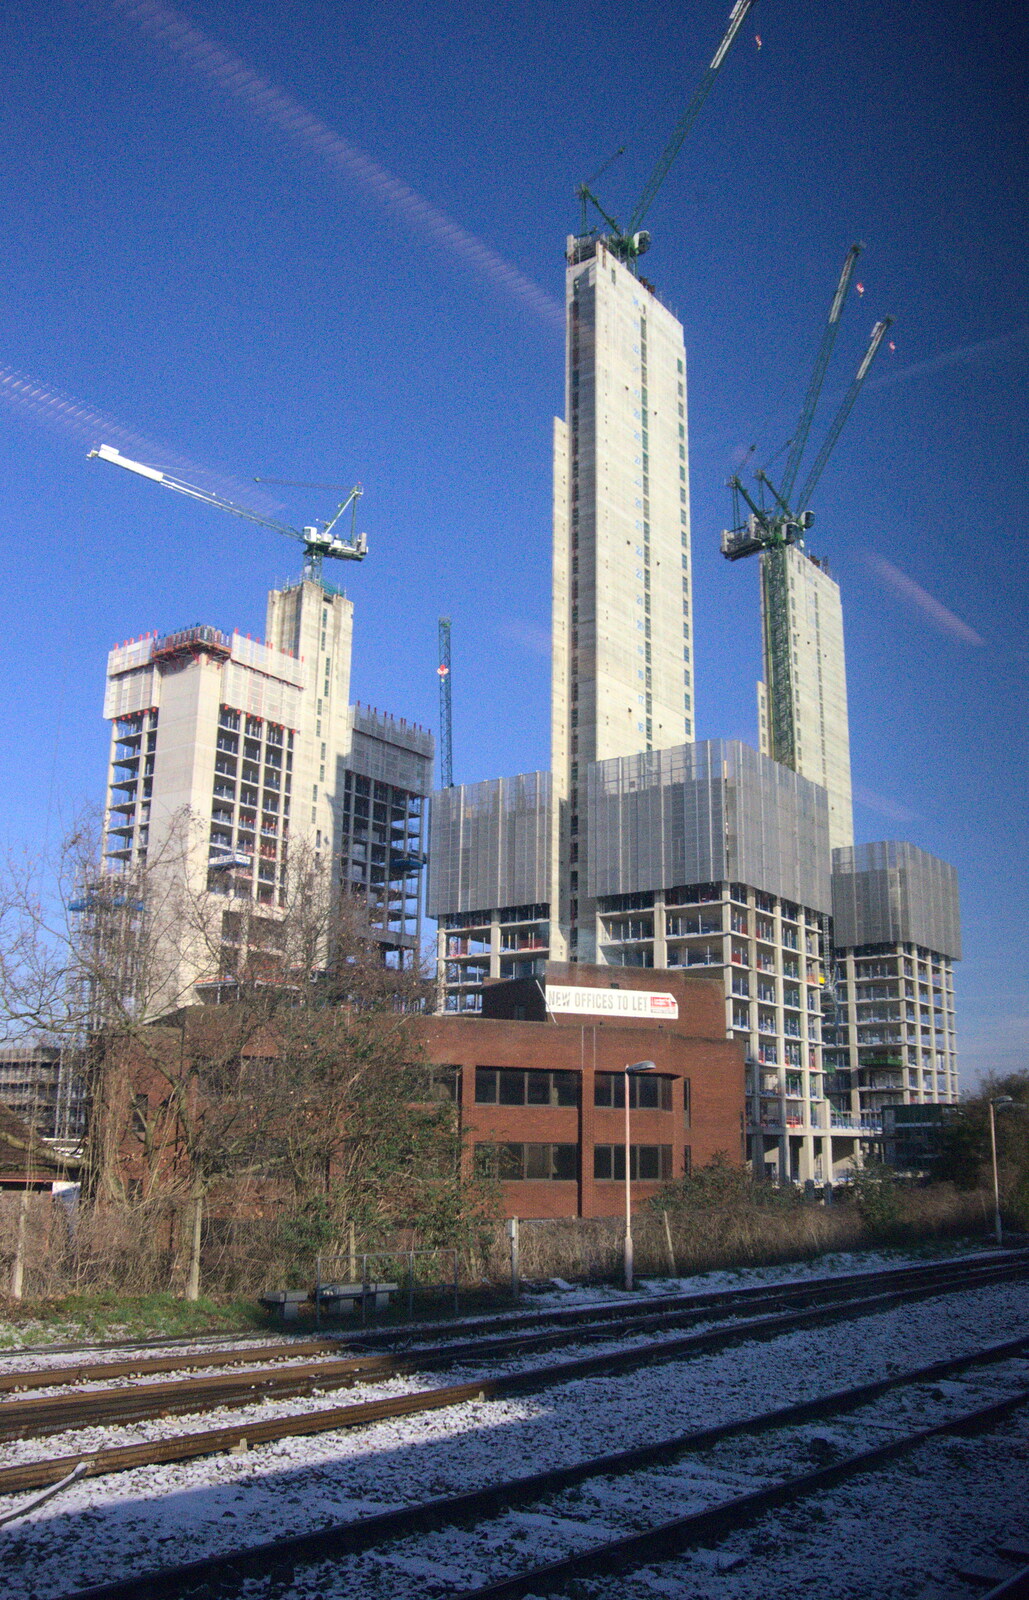 The very thin core of new tower blocks in Guildford from A Wintry Trip Down South, Walkford, Dorset - 1st February 2019